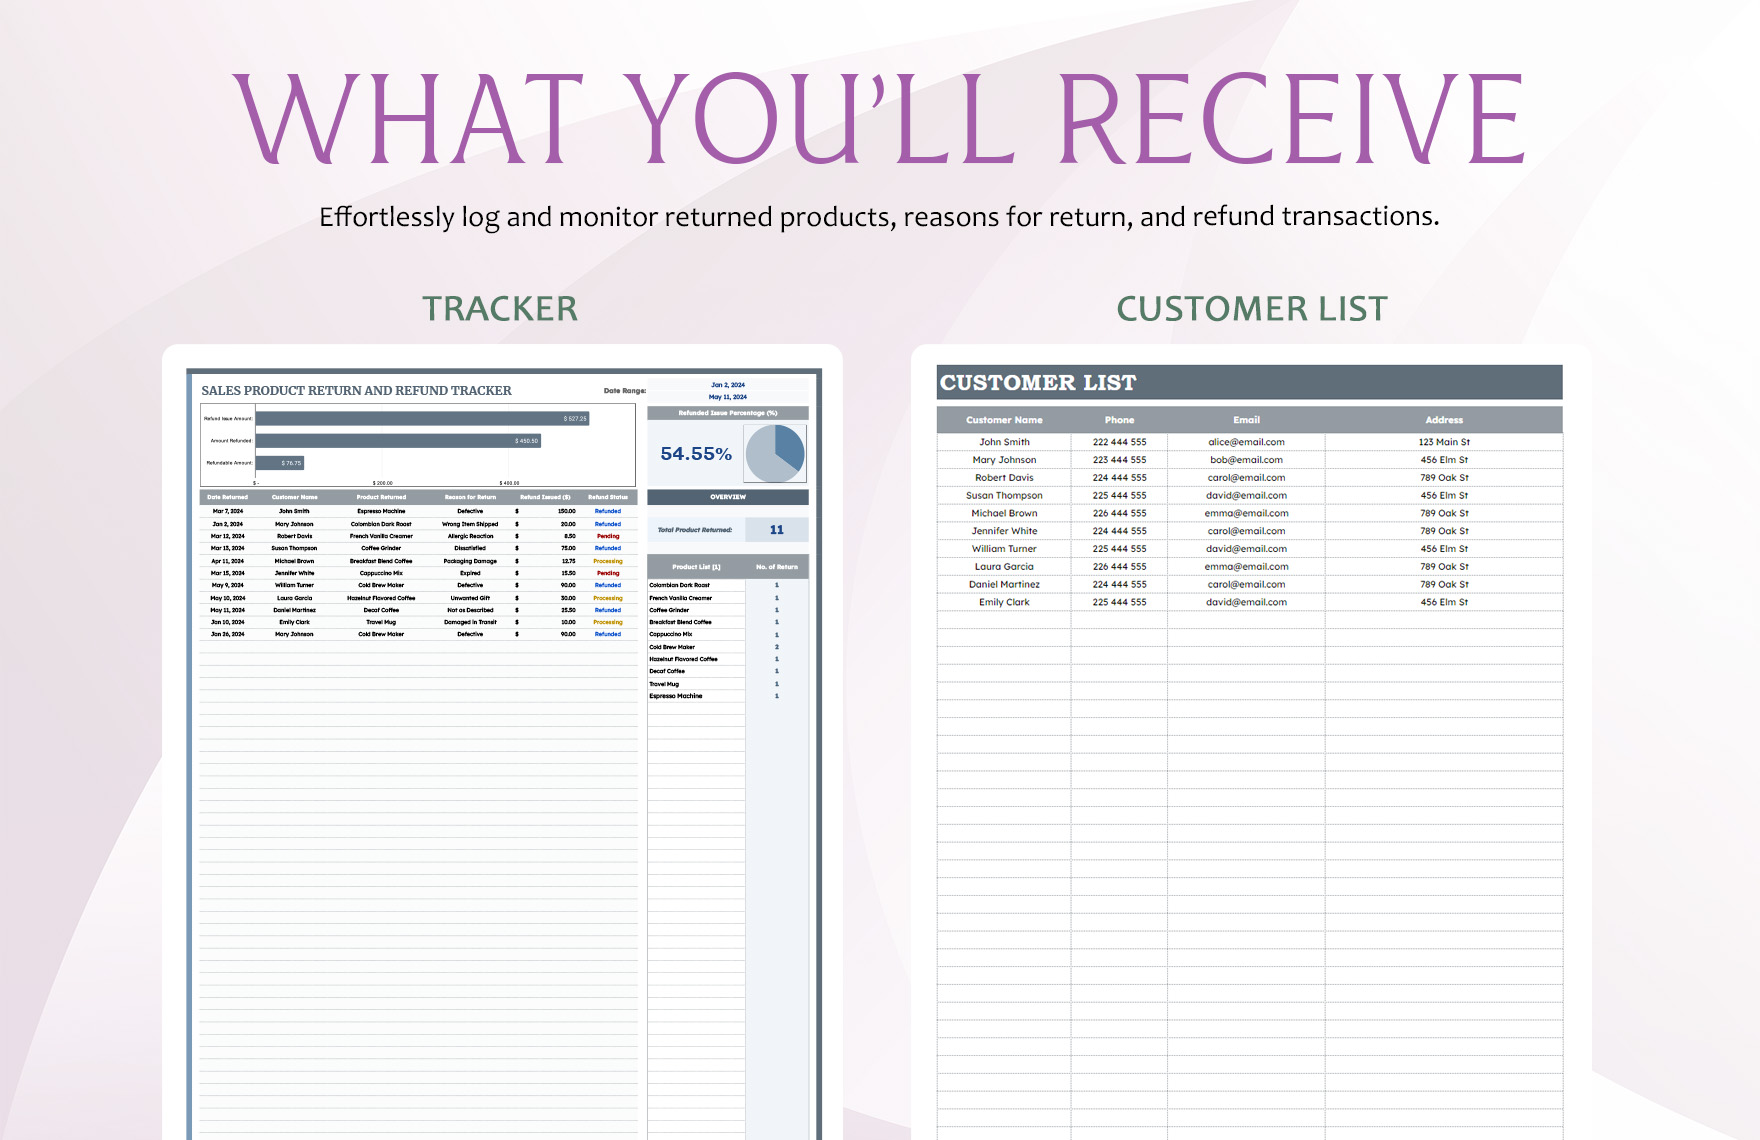 Sales Product Return and Refund Tracker Template